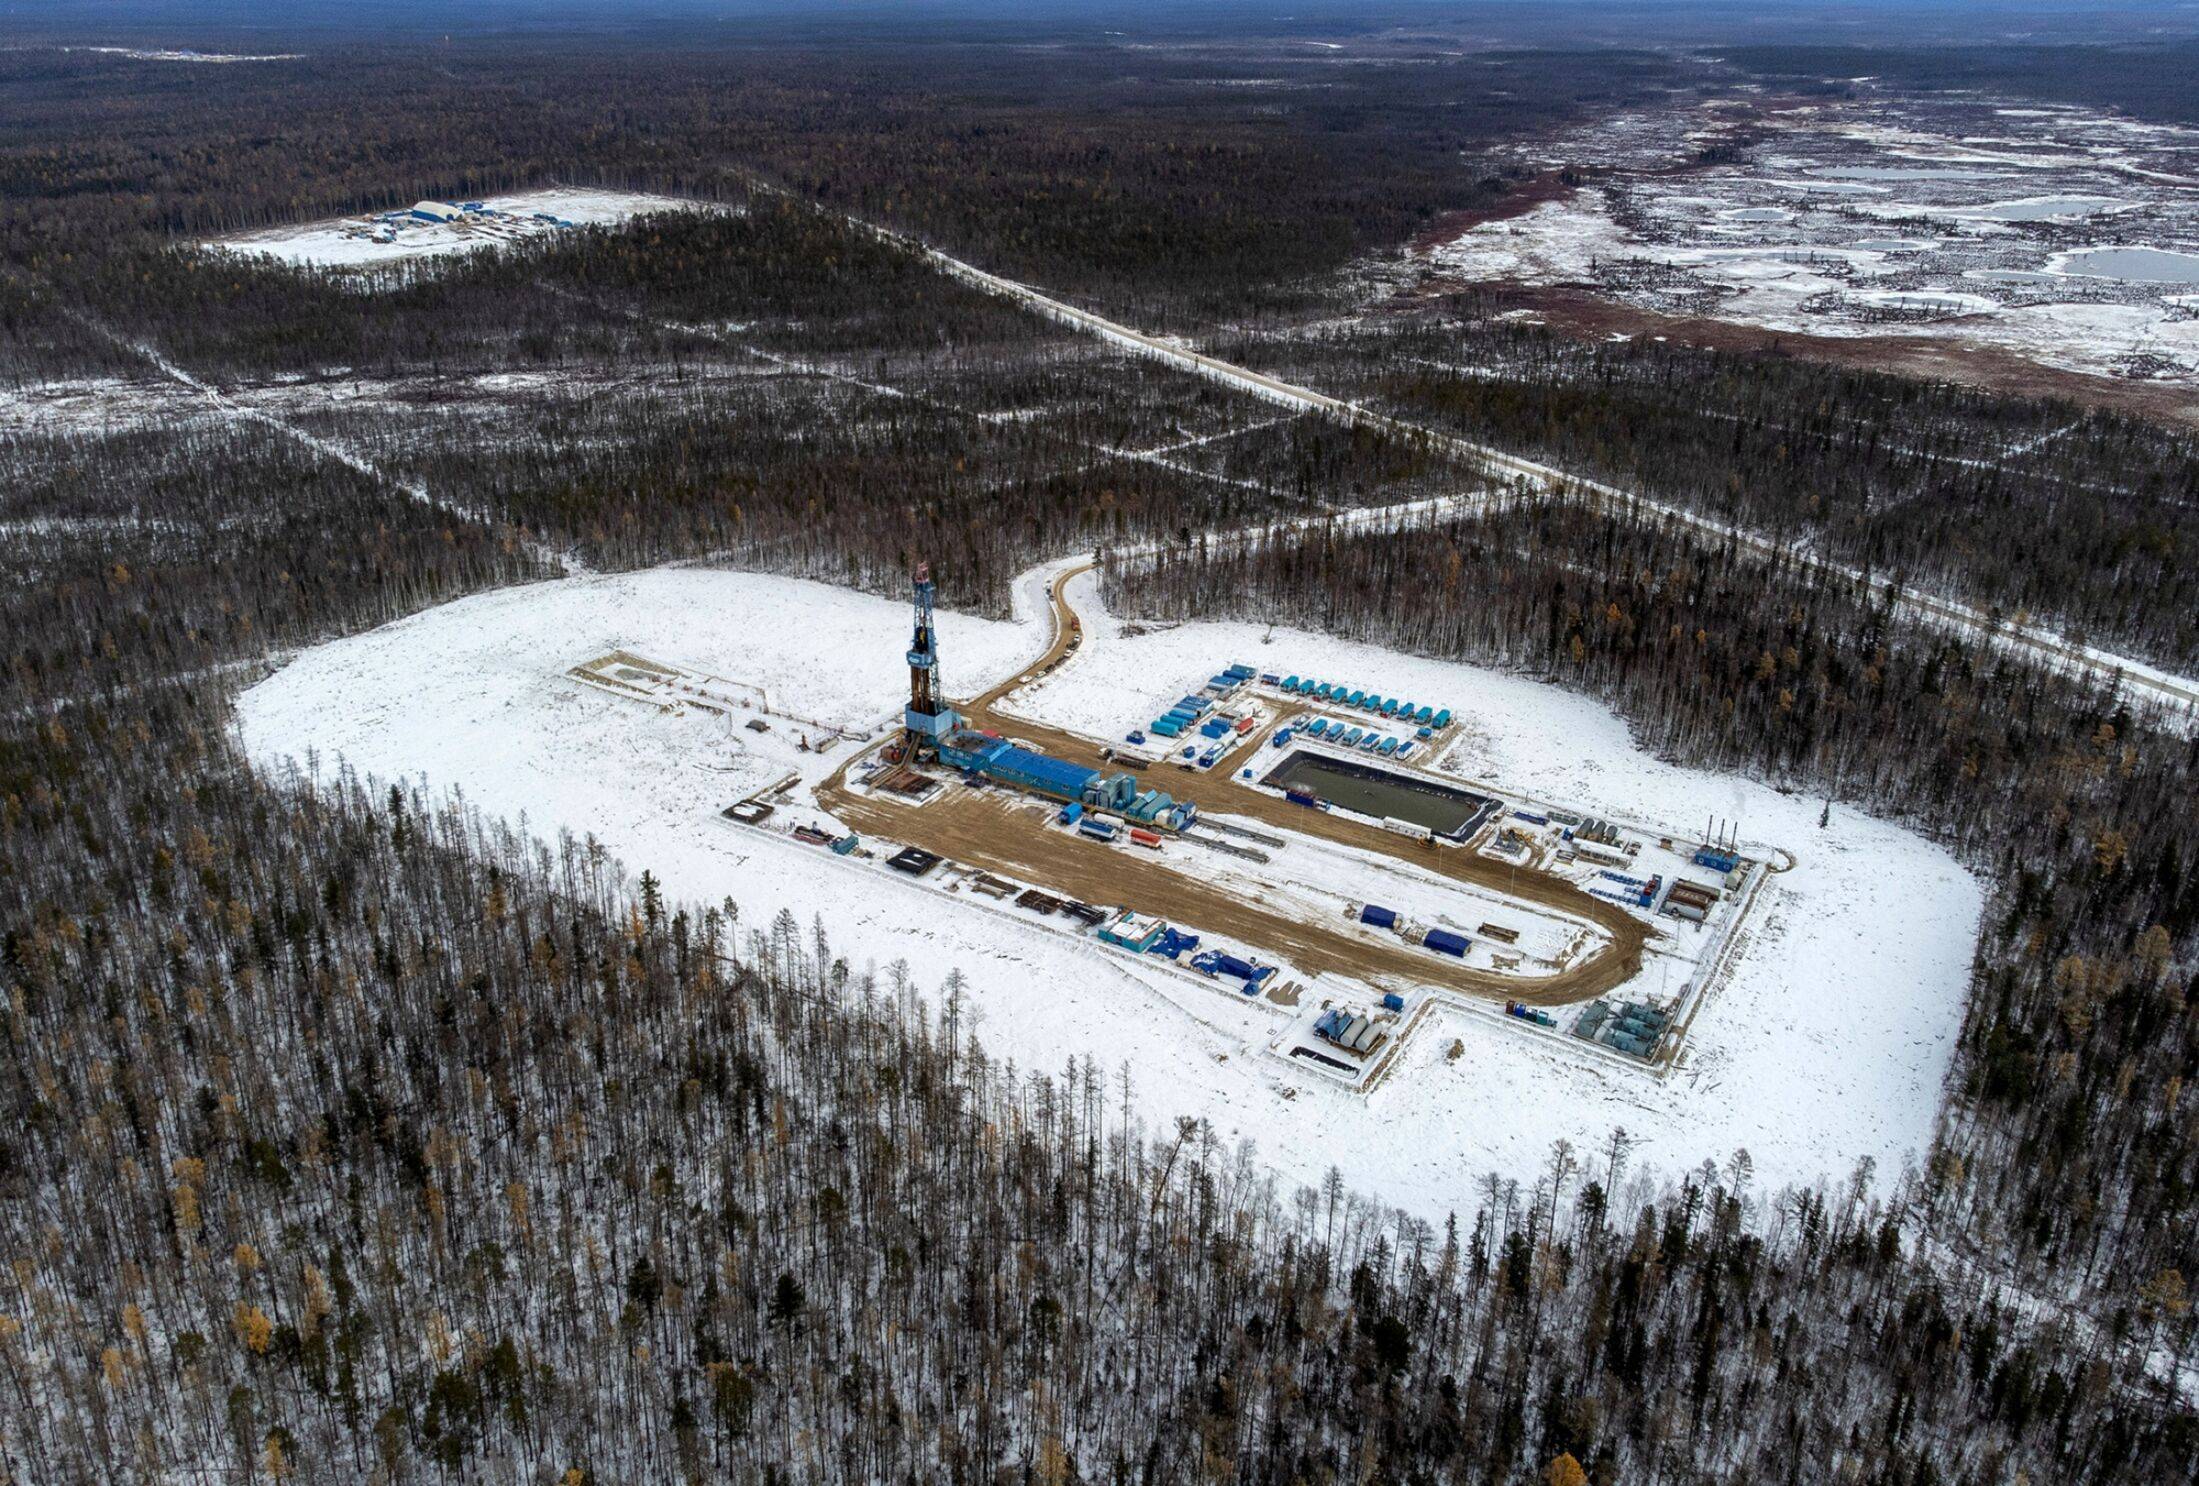 A gas drilling rig on the Gazprom PJSC Chayandinskoye oil, gas and condensate field, a resource base for the Power of Siberia gas pipeline in 2021 | BLOOMBERG